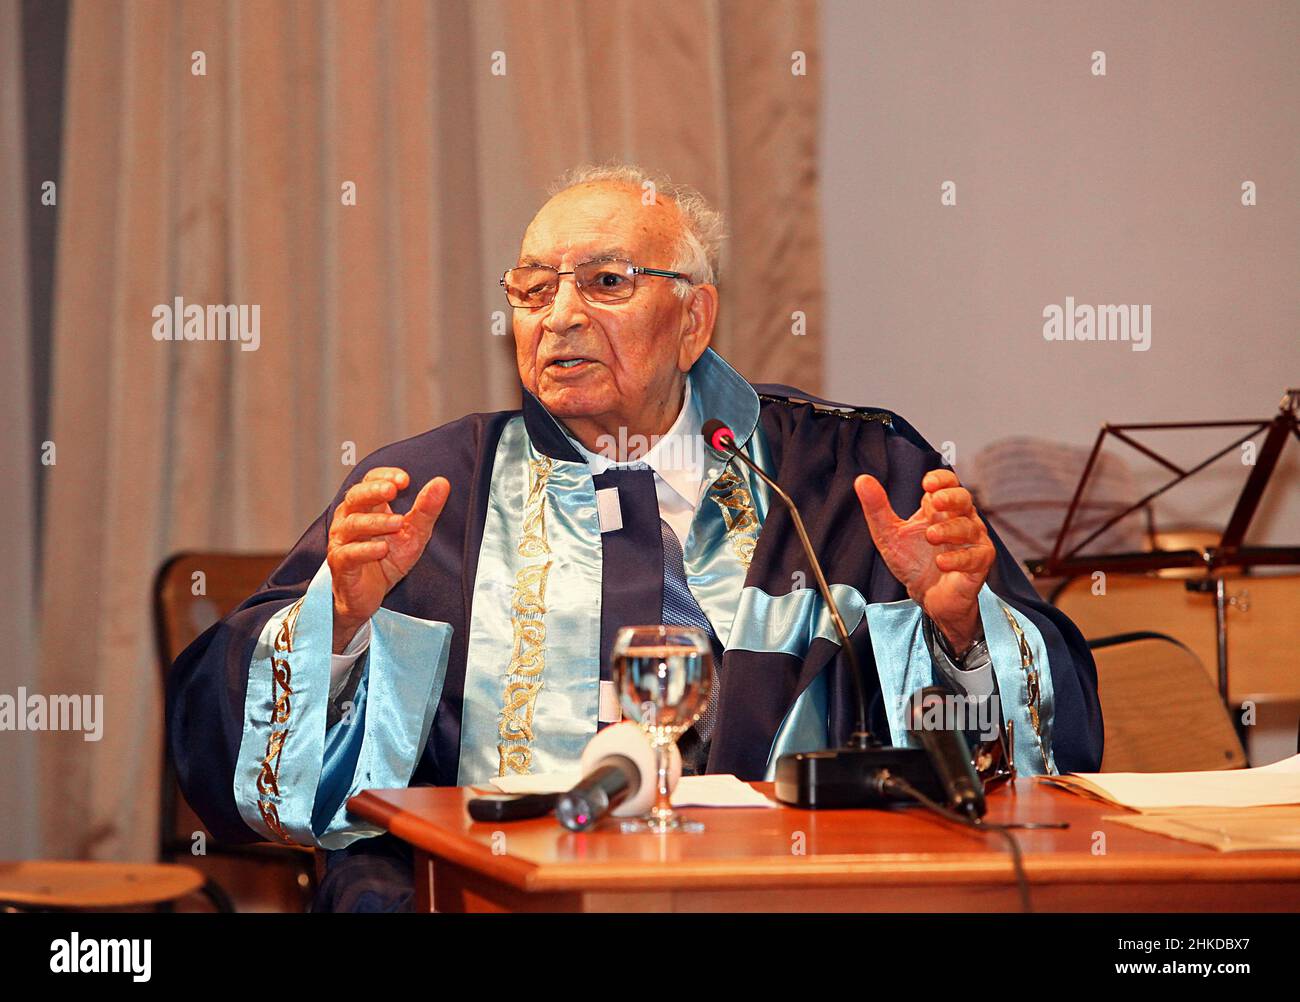 ISTANBUL, TURKEY - DECEMBER 10: Turkish legendary author Yasar Kemal portrait on December 10, 2011 in Istanbul, Turkey. He is one of Turkey's leading writers. Stock Photo